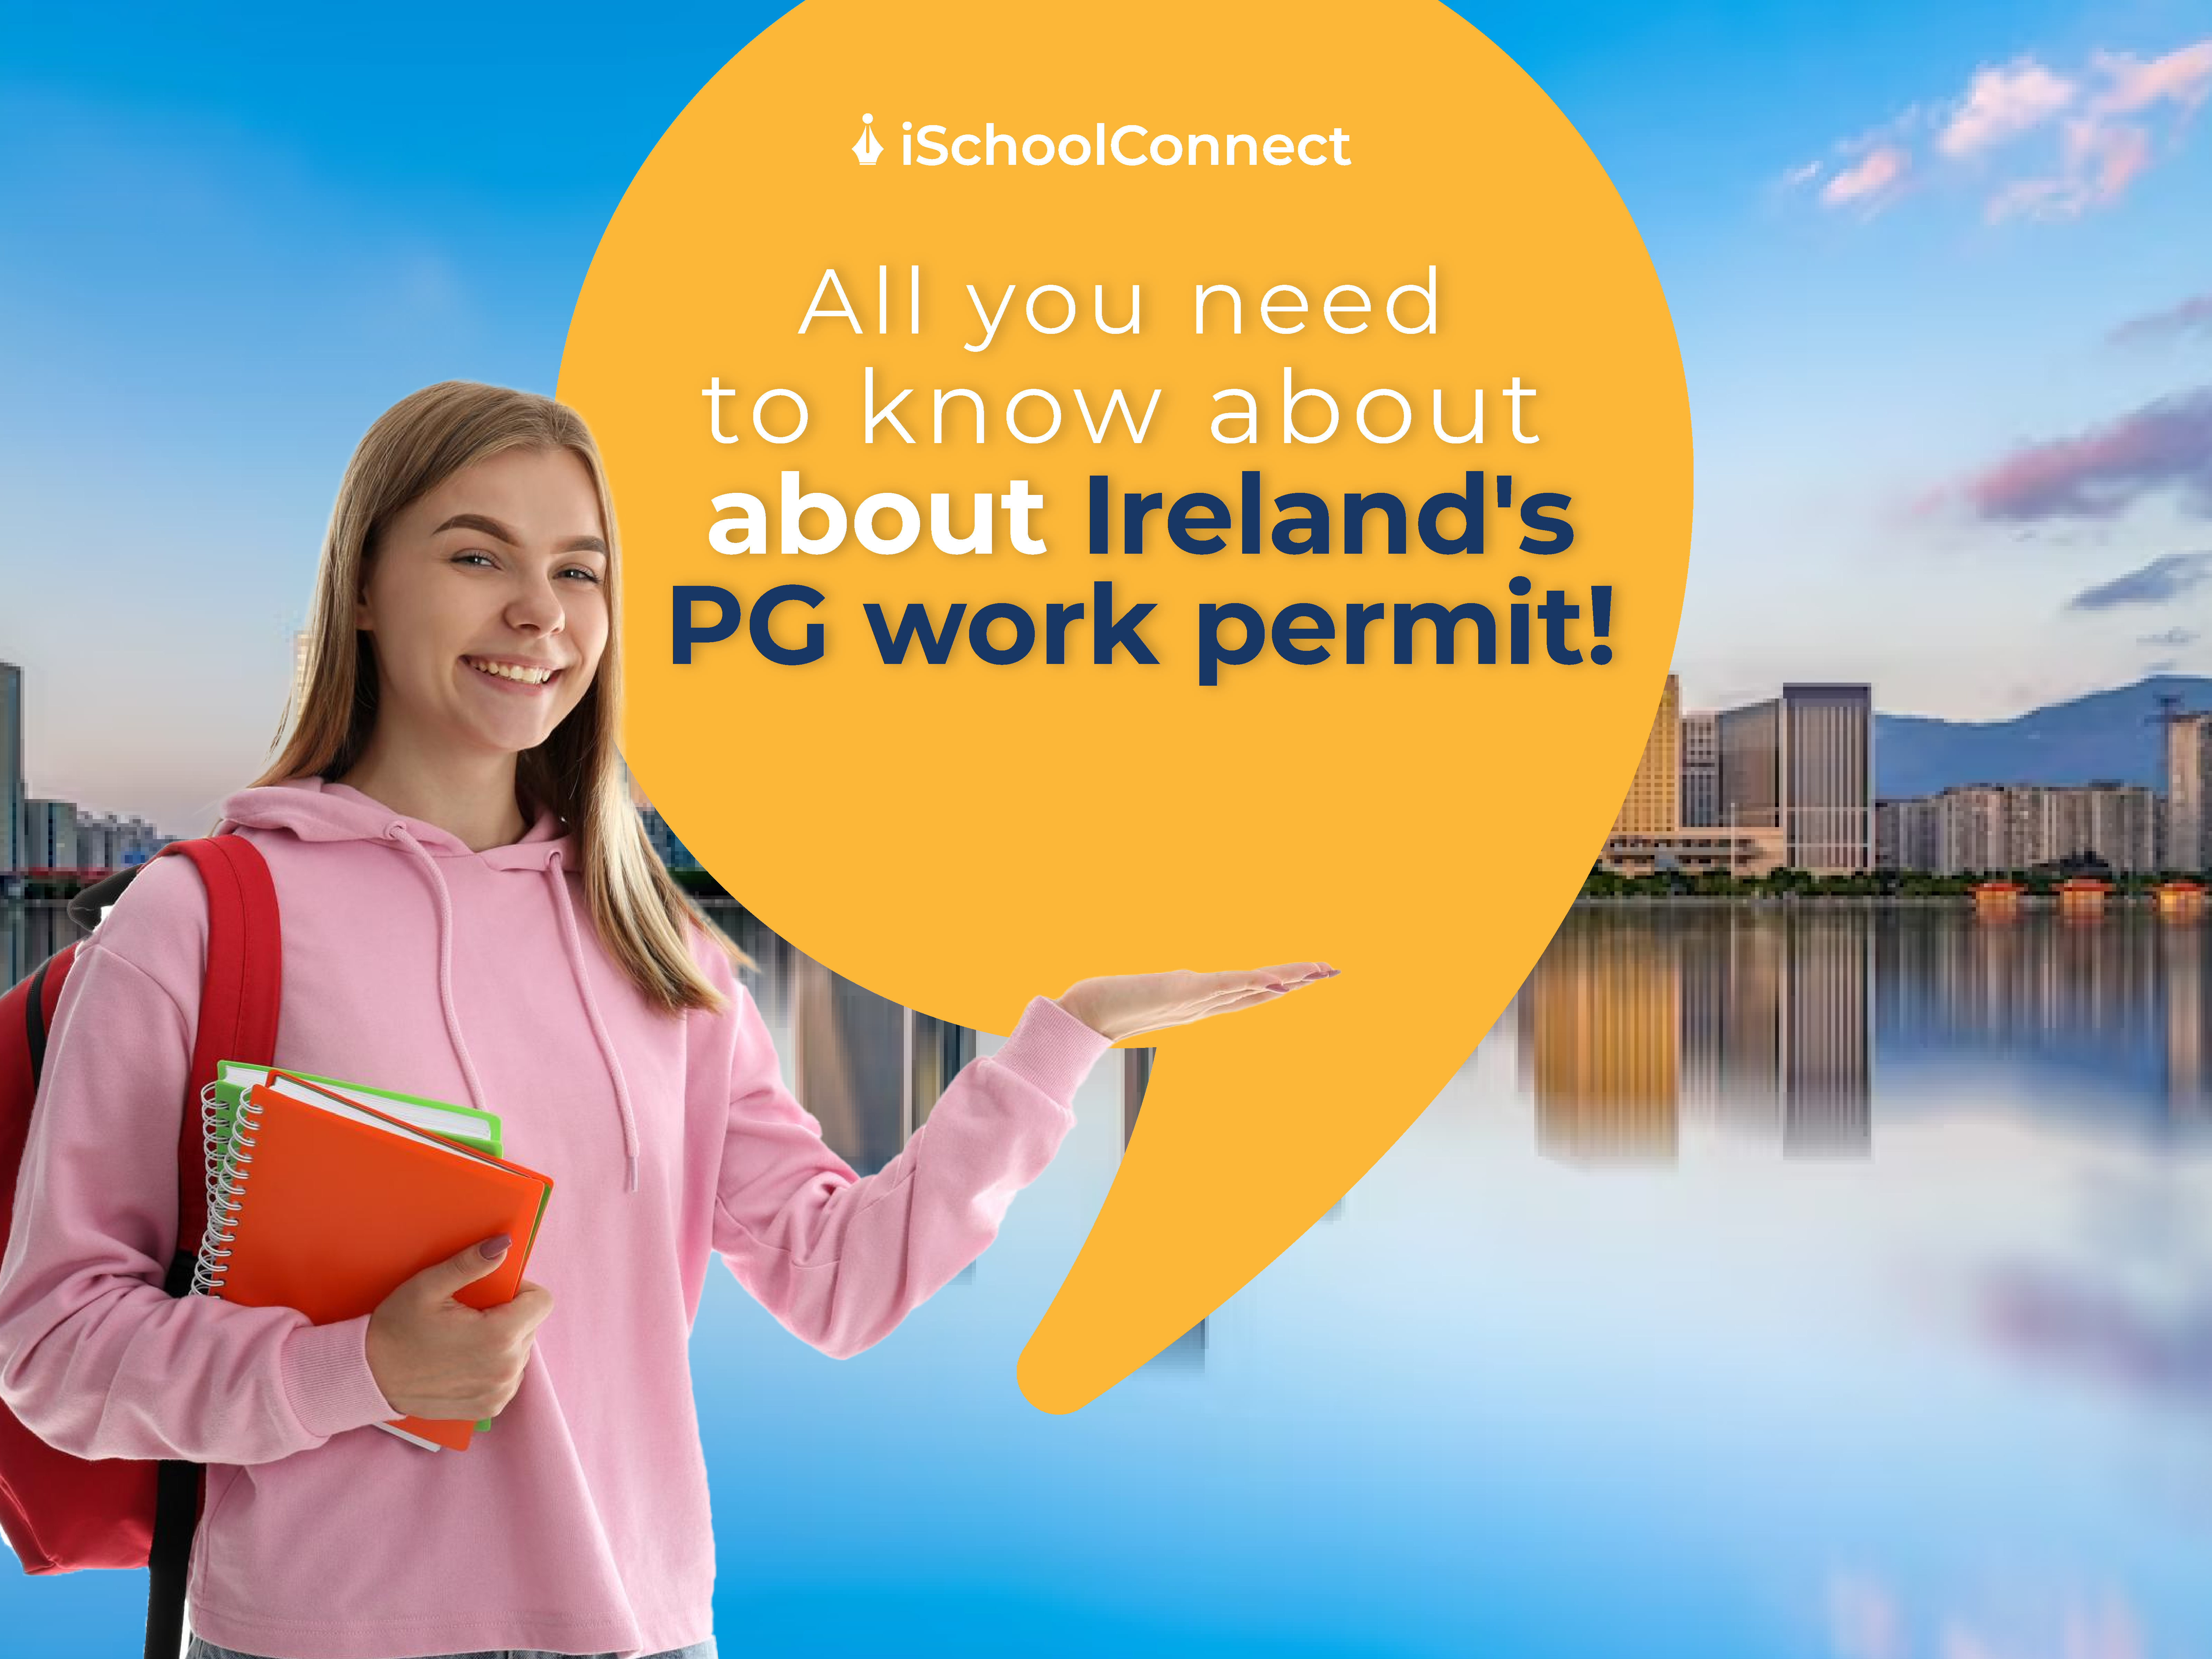 Ireland's post-study work permit | All you need to know